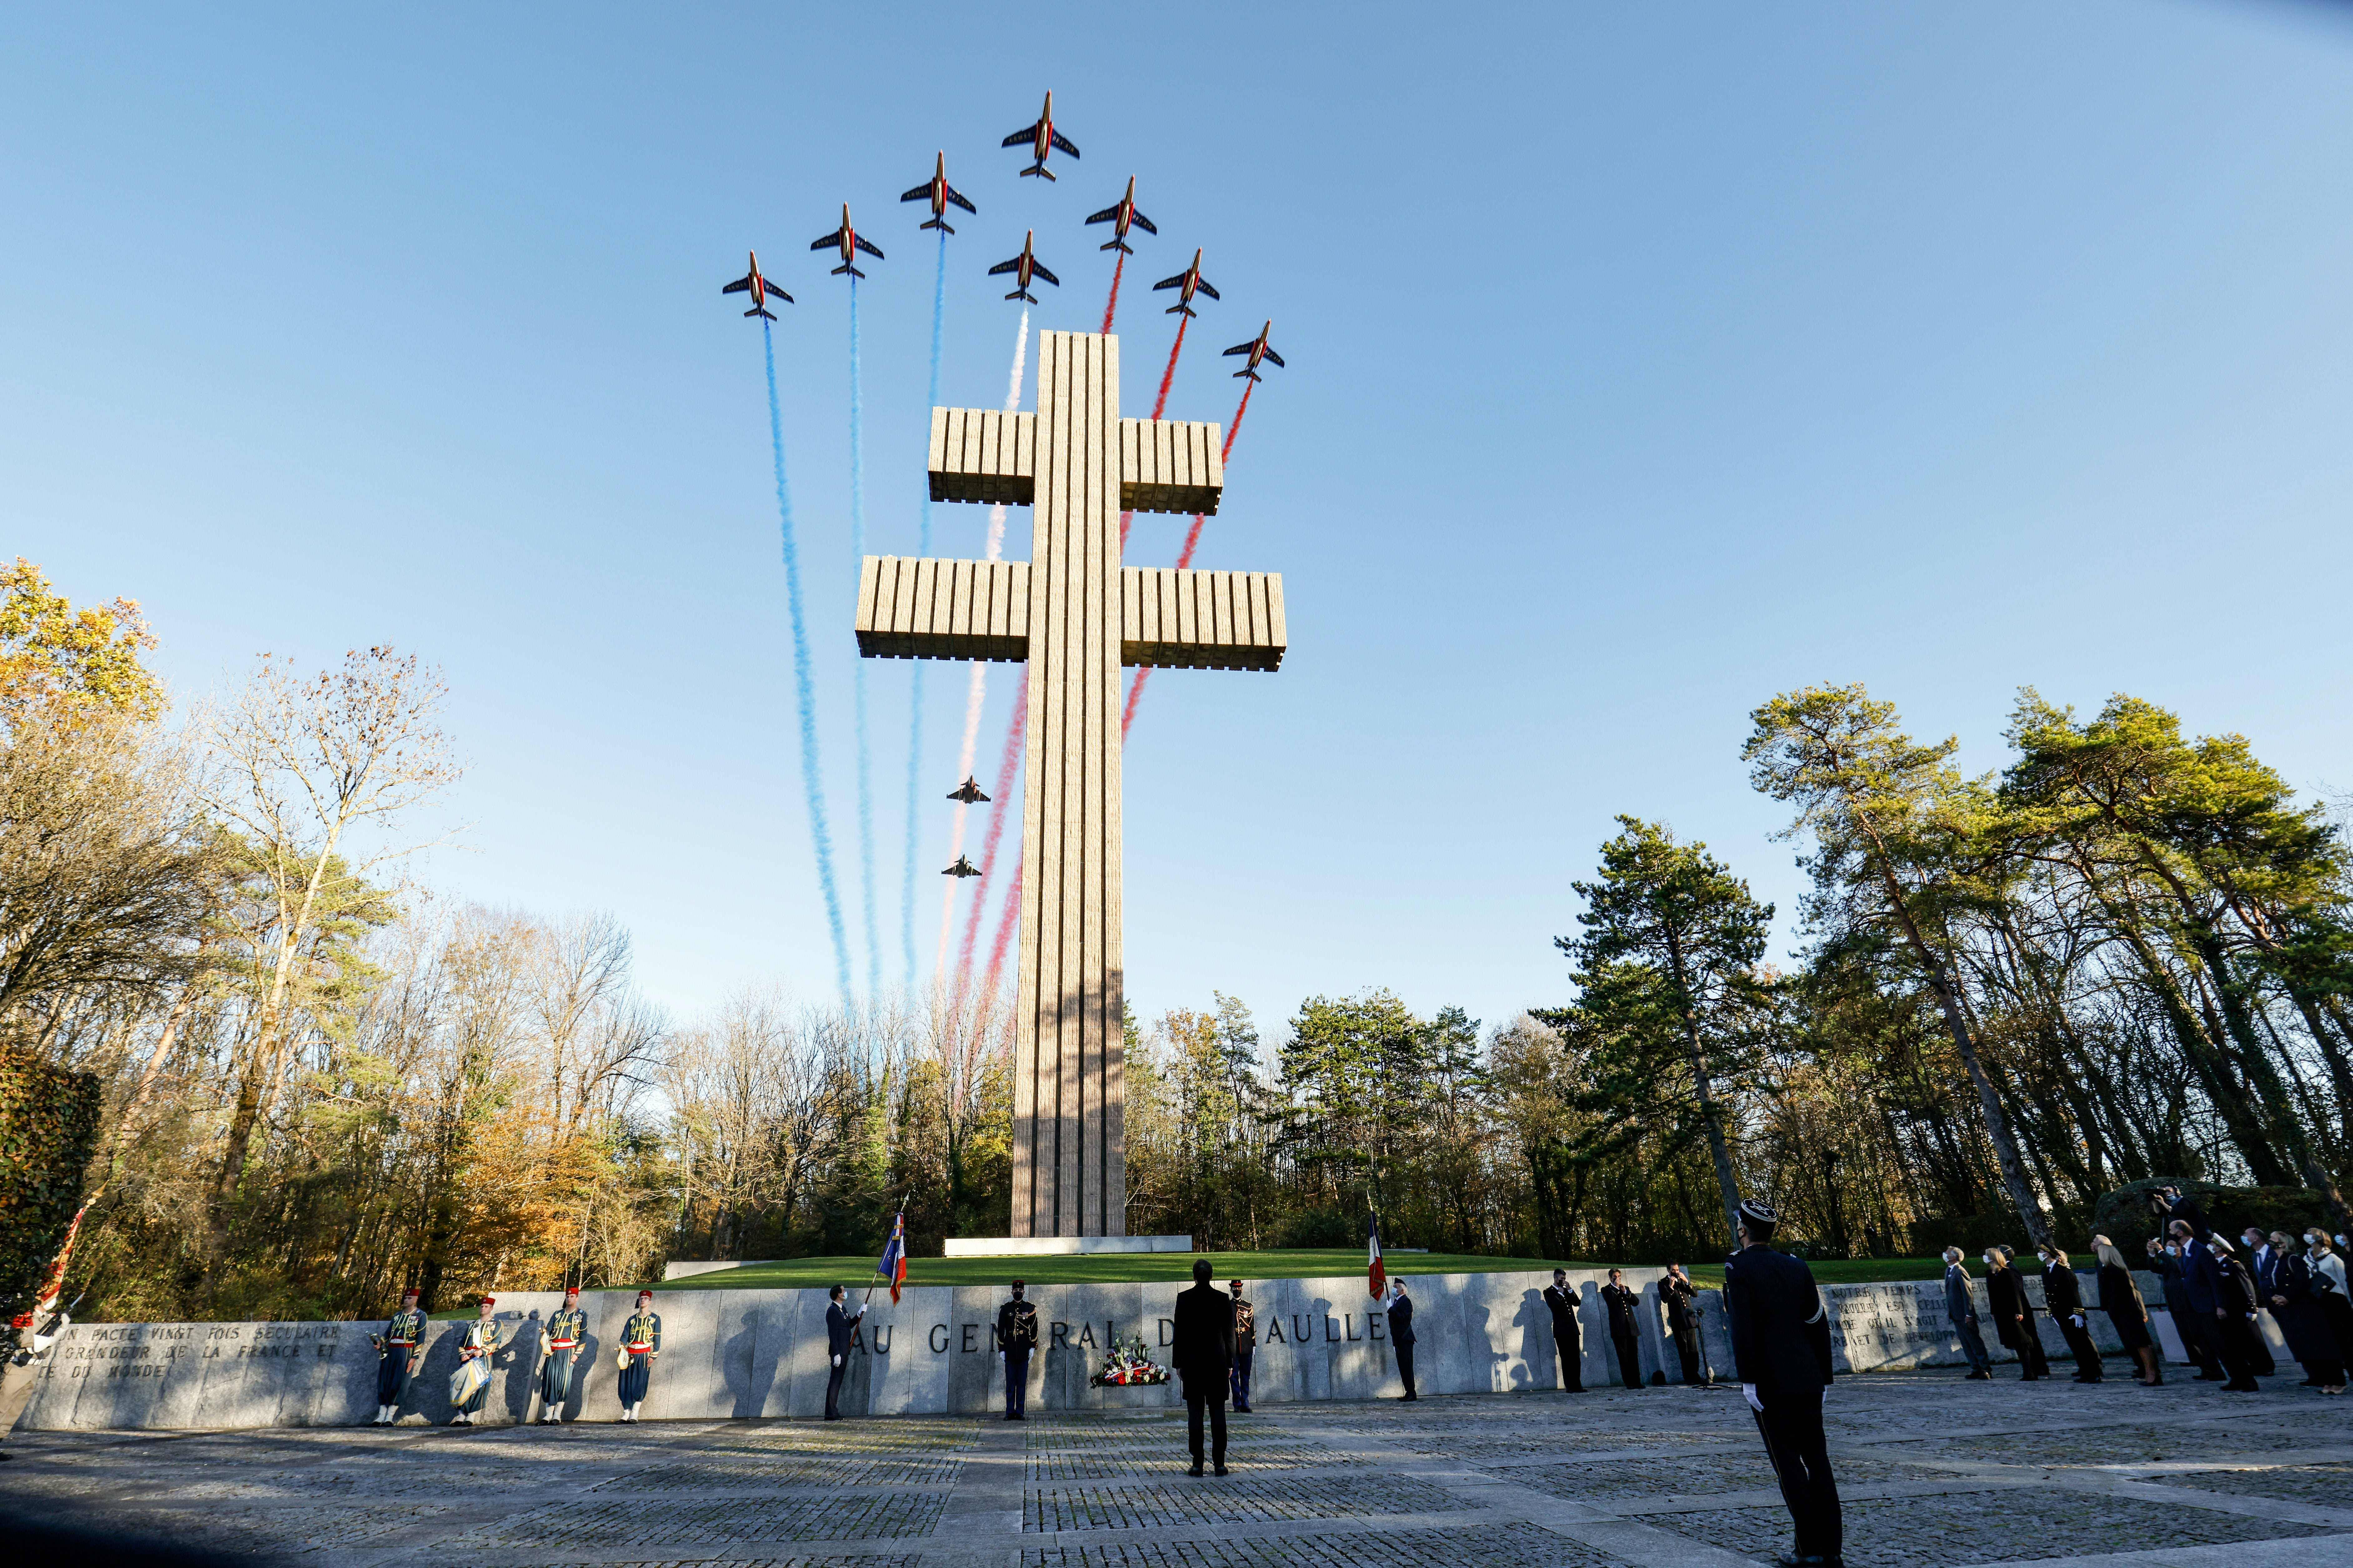 France's air force flies over a memorial to the late French president Charles de Gaulle on Nov. 9. (Ludovic Marin/AFP/Getty Images)